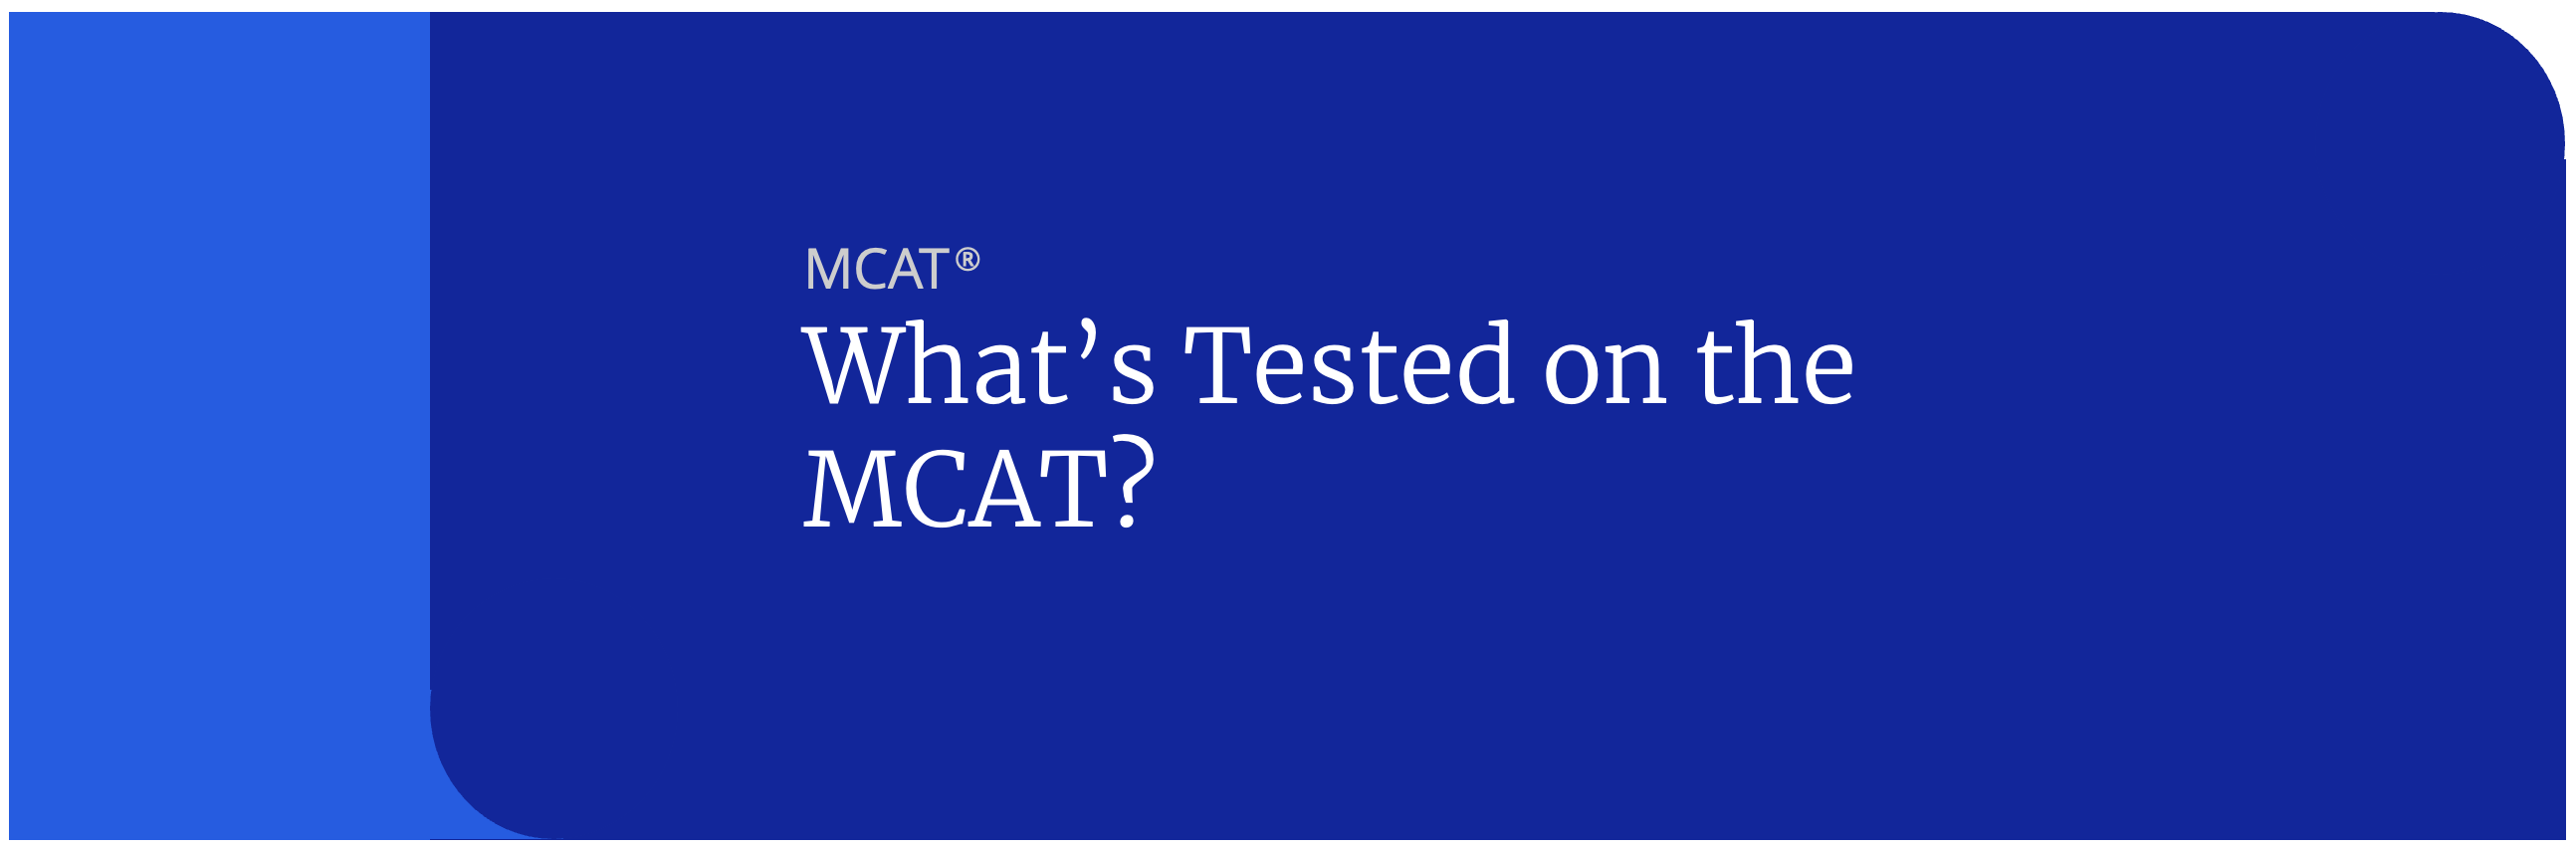 what is tested on the mcat exam